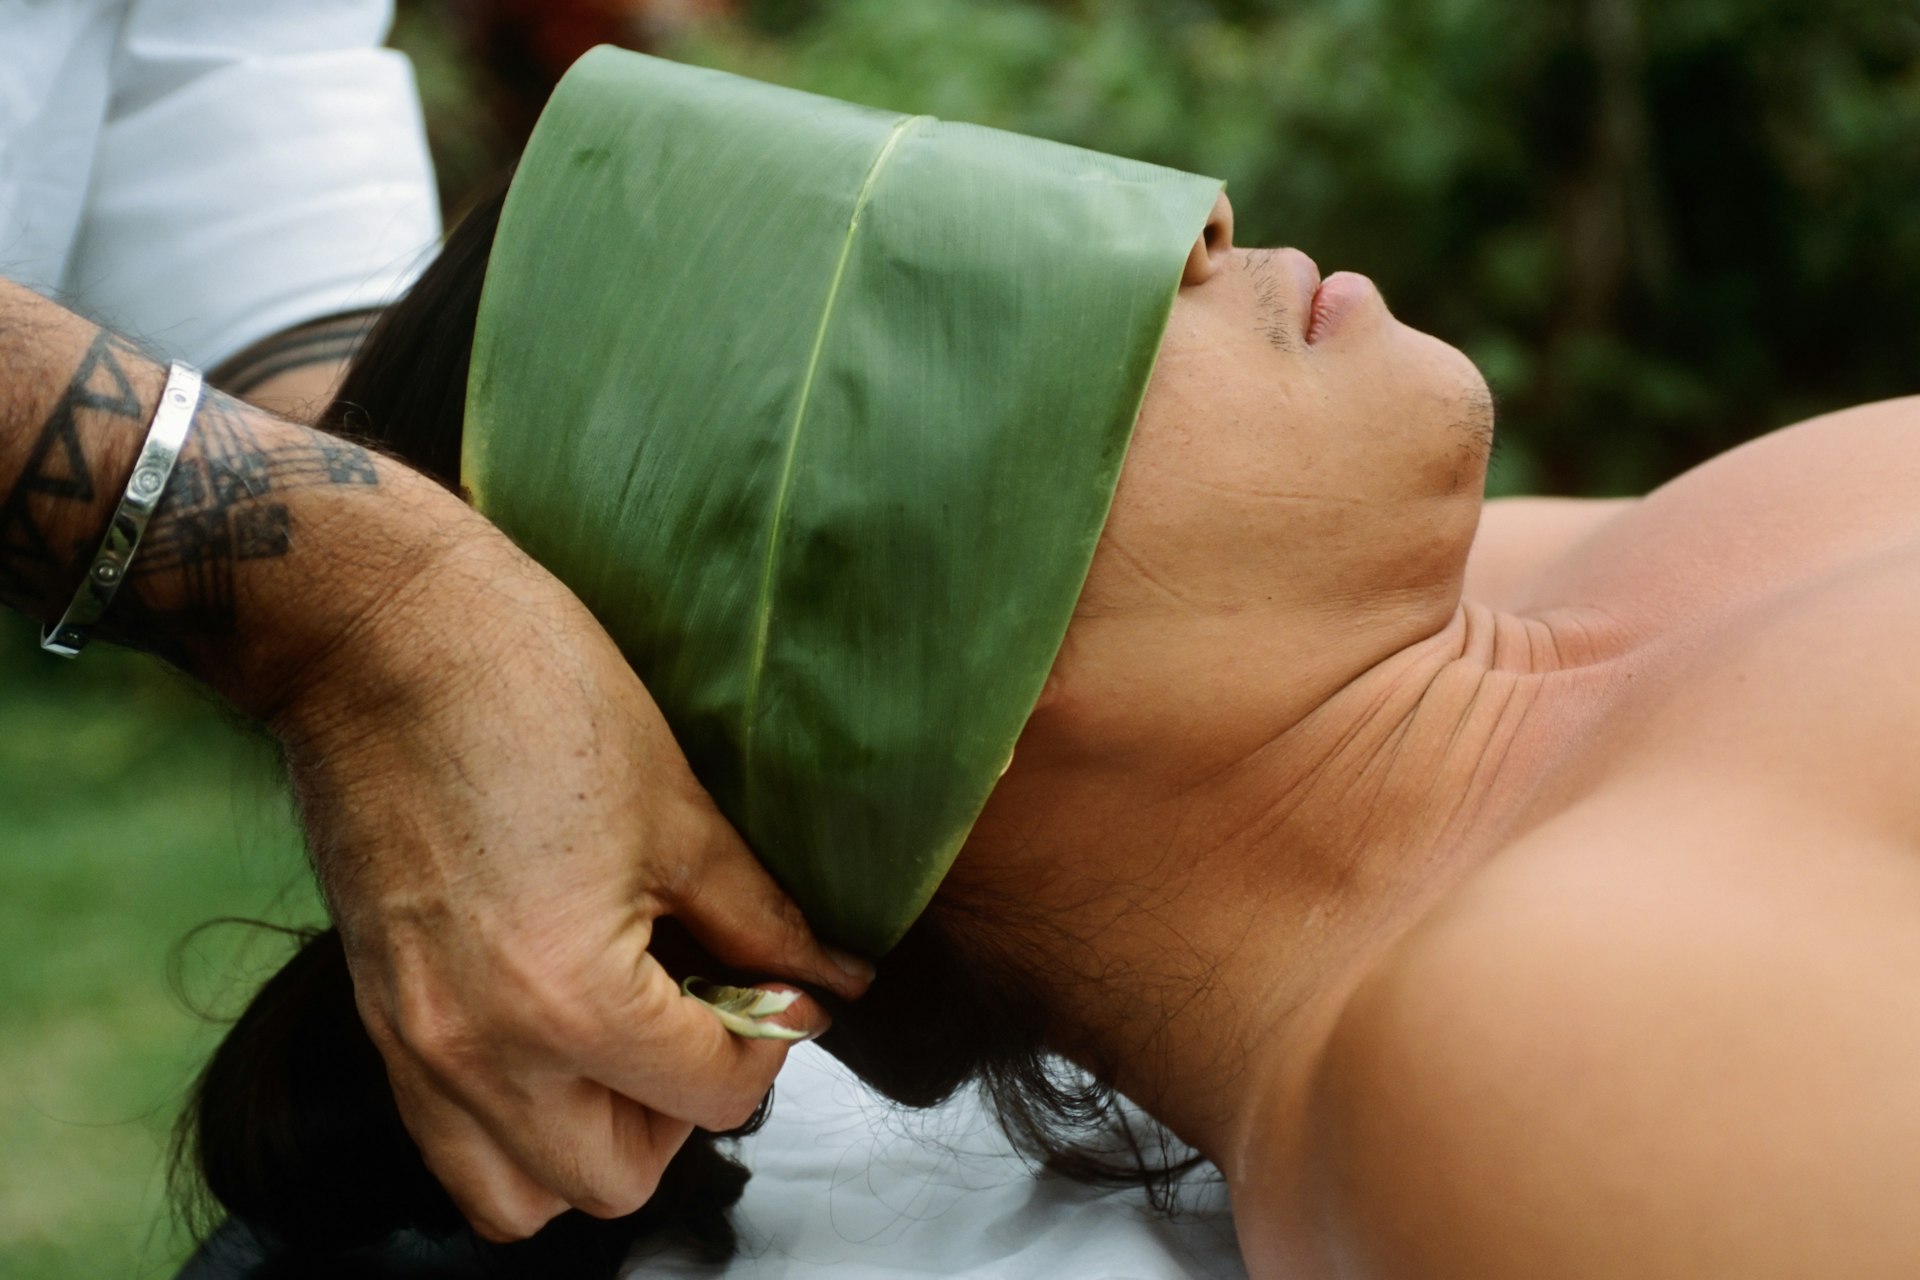 Early Polynesian settlers brought massage techniques to the islands, and it evolved over time into lomilomi massage. Image by Karen Kasmauski / Science Faction / Getty